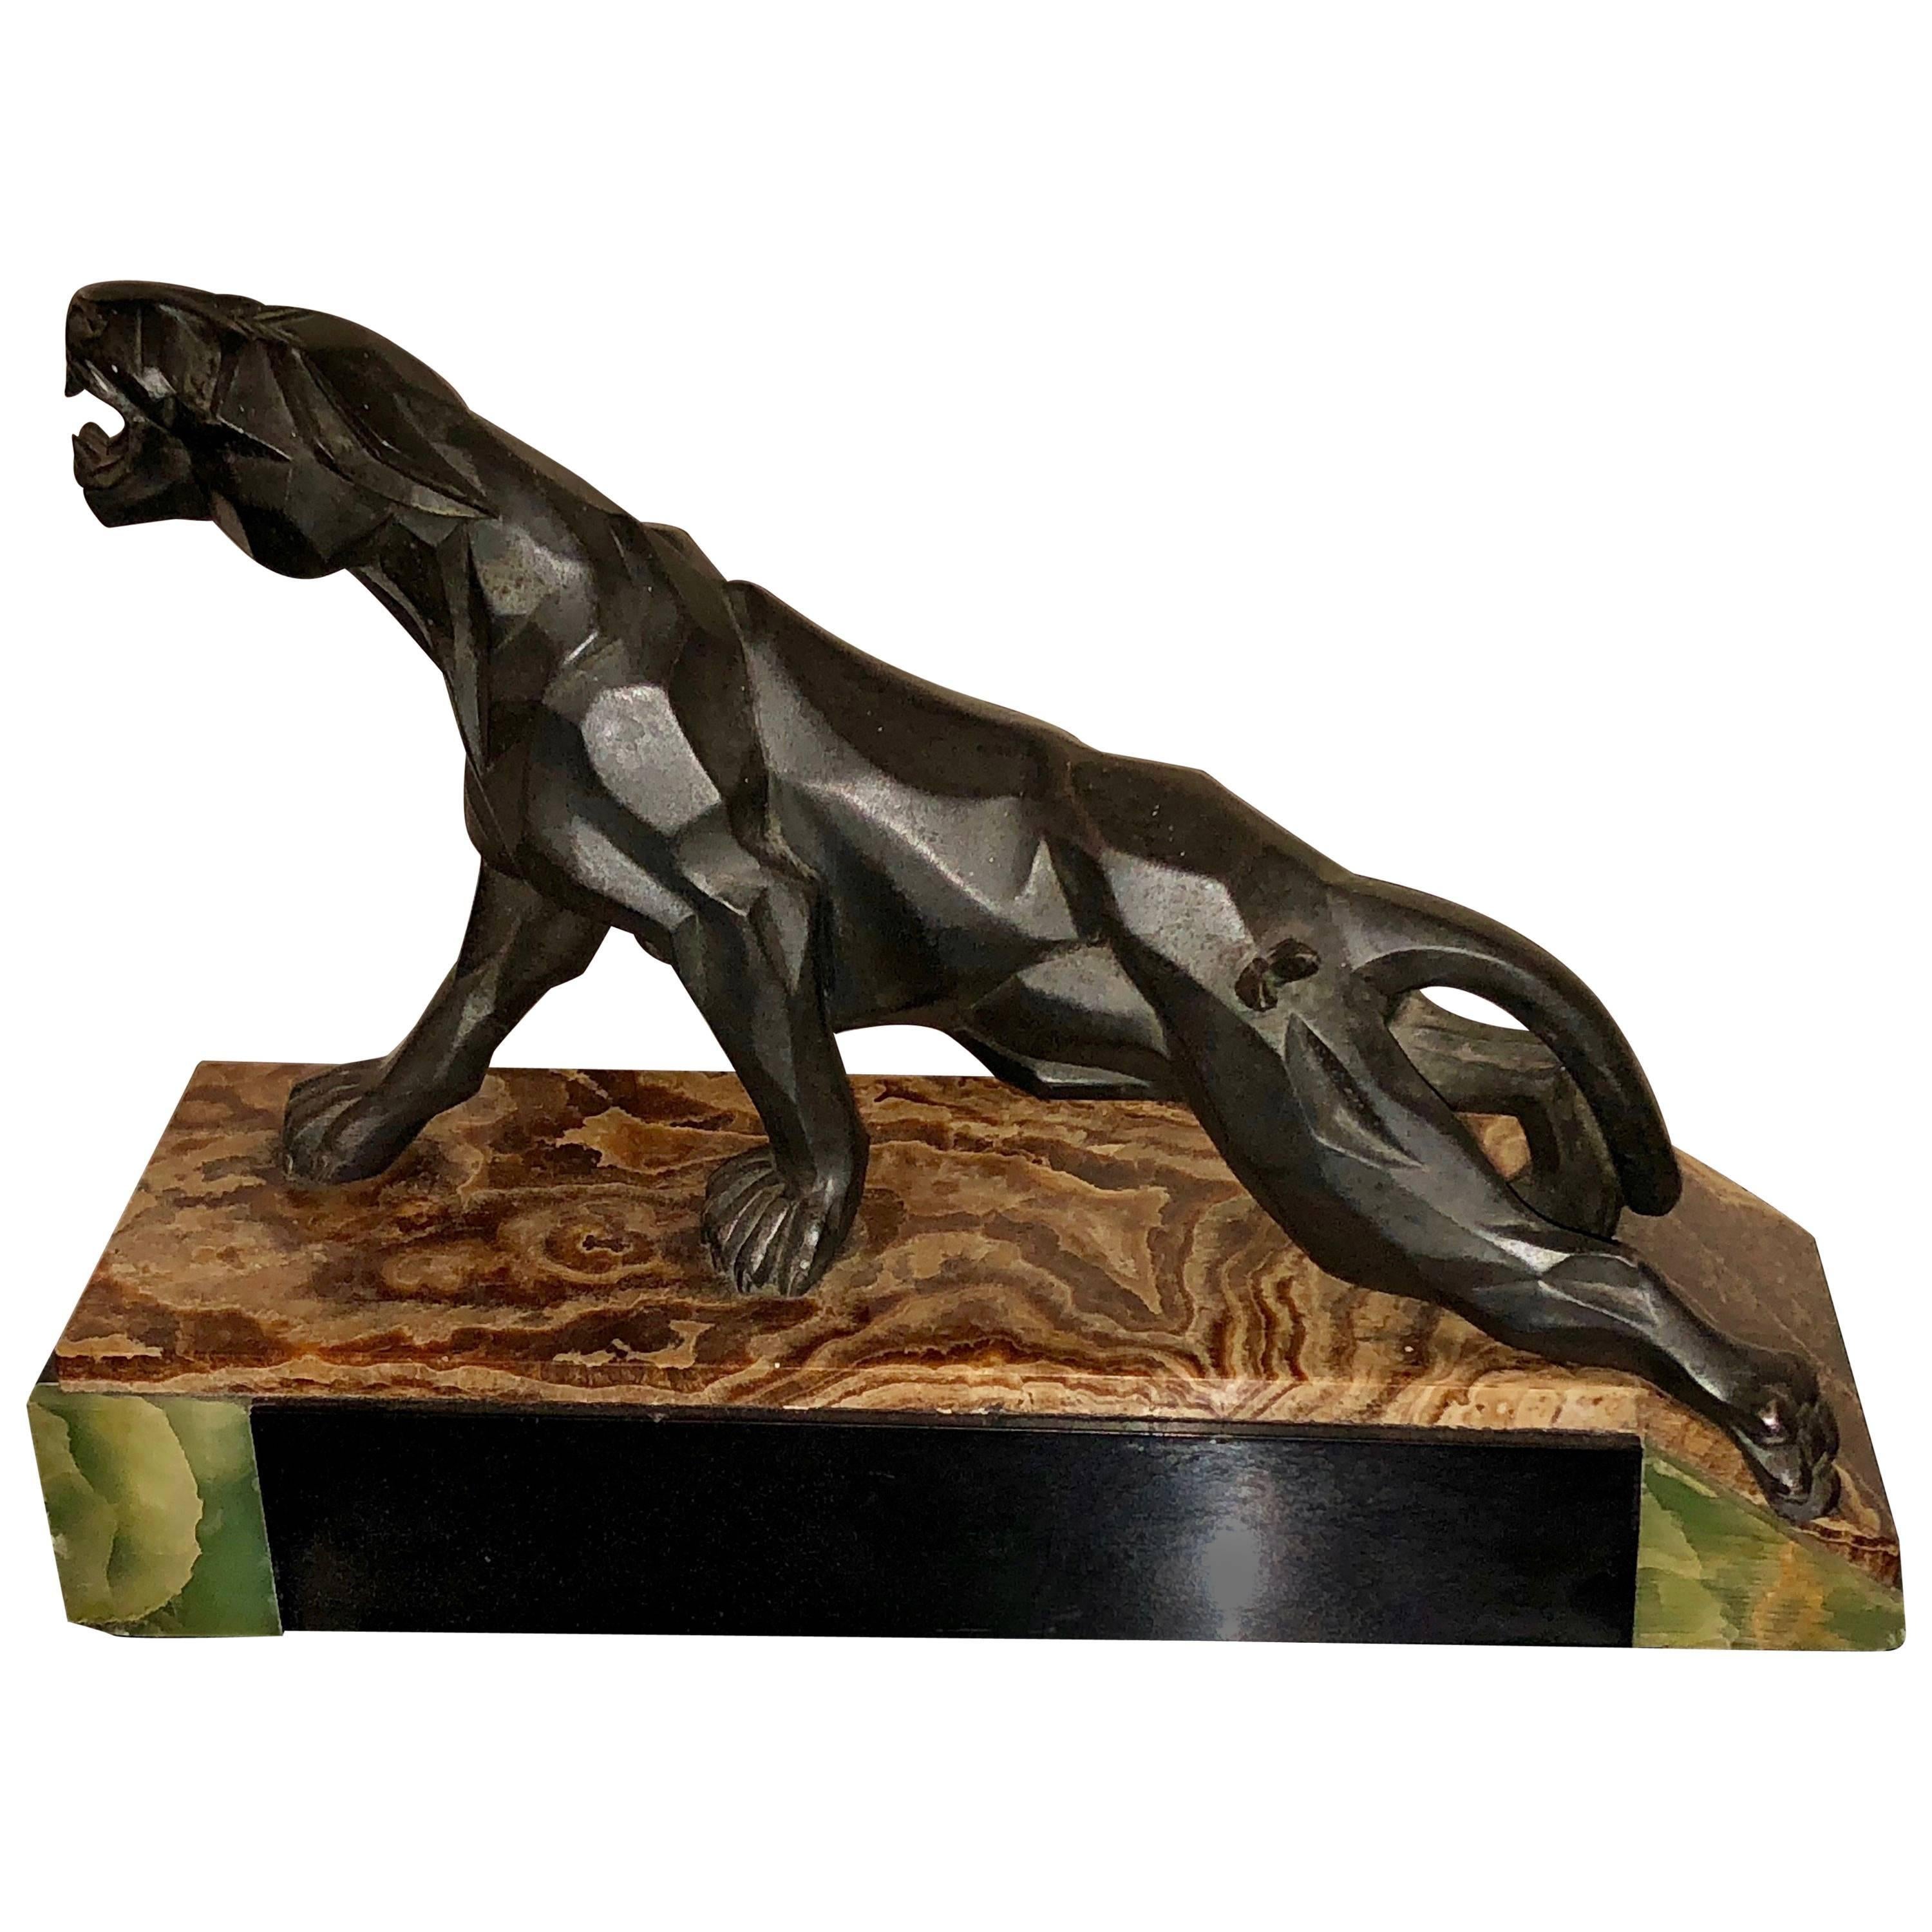 1930s Cubist sculpture of a climbing and growling panther on the prowl. Art Deco design with the artistic facet-like details are imaginative and convey a sense a strength, power and ferocity. This bold sculpture is in excellent original condition.